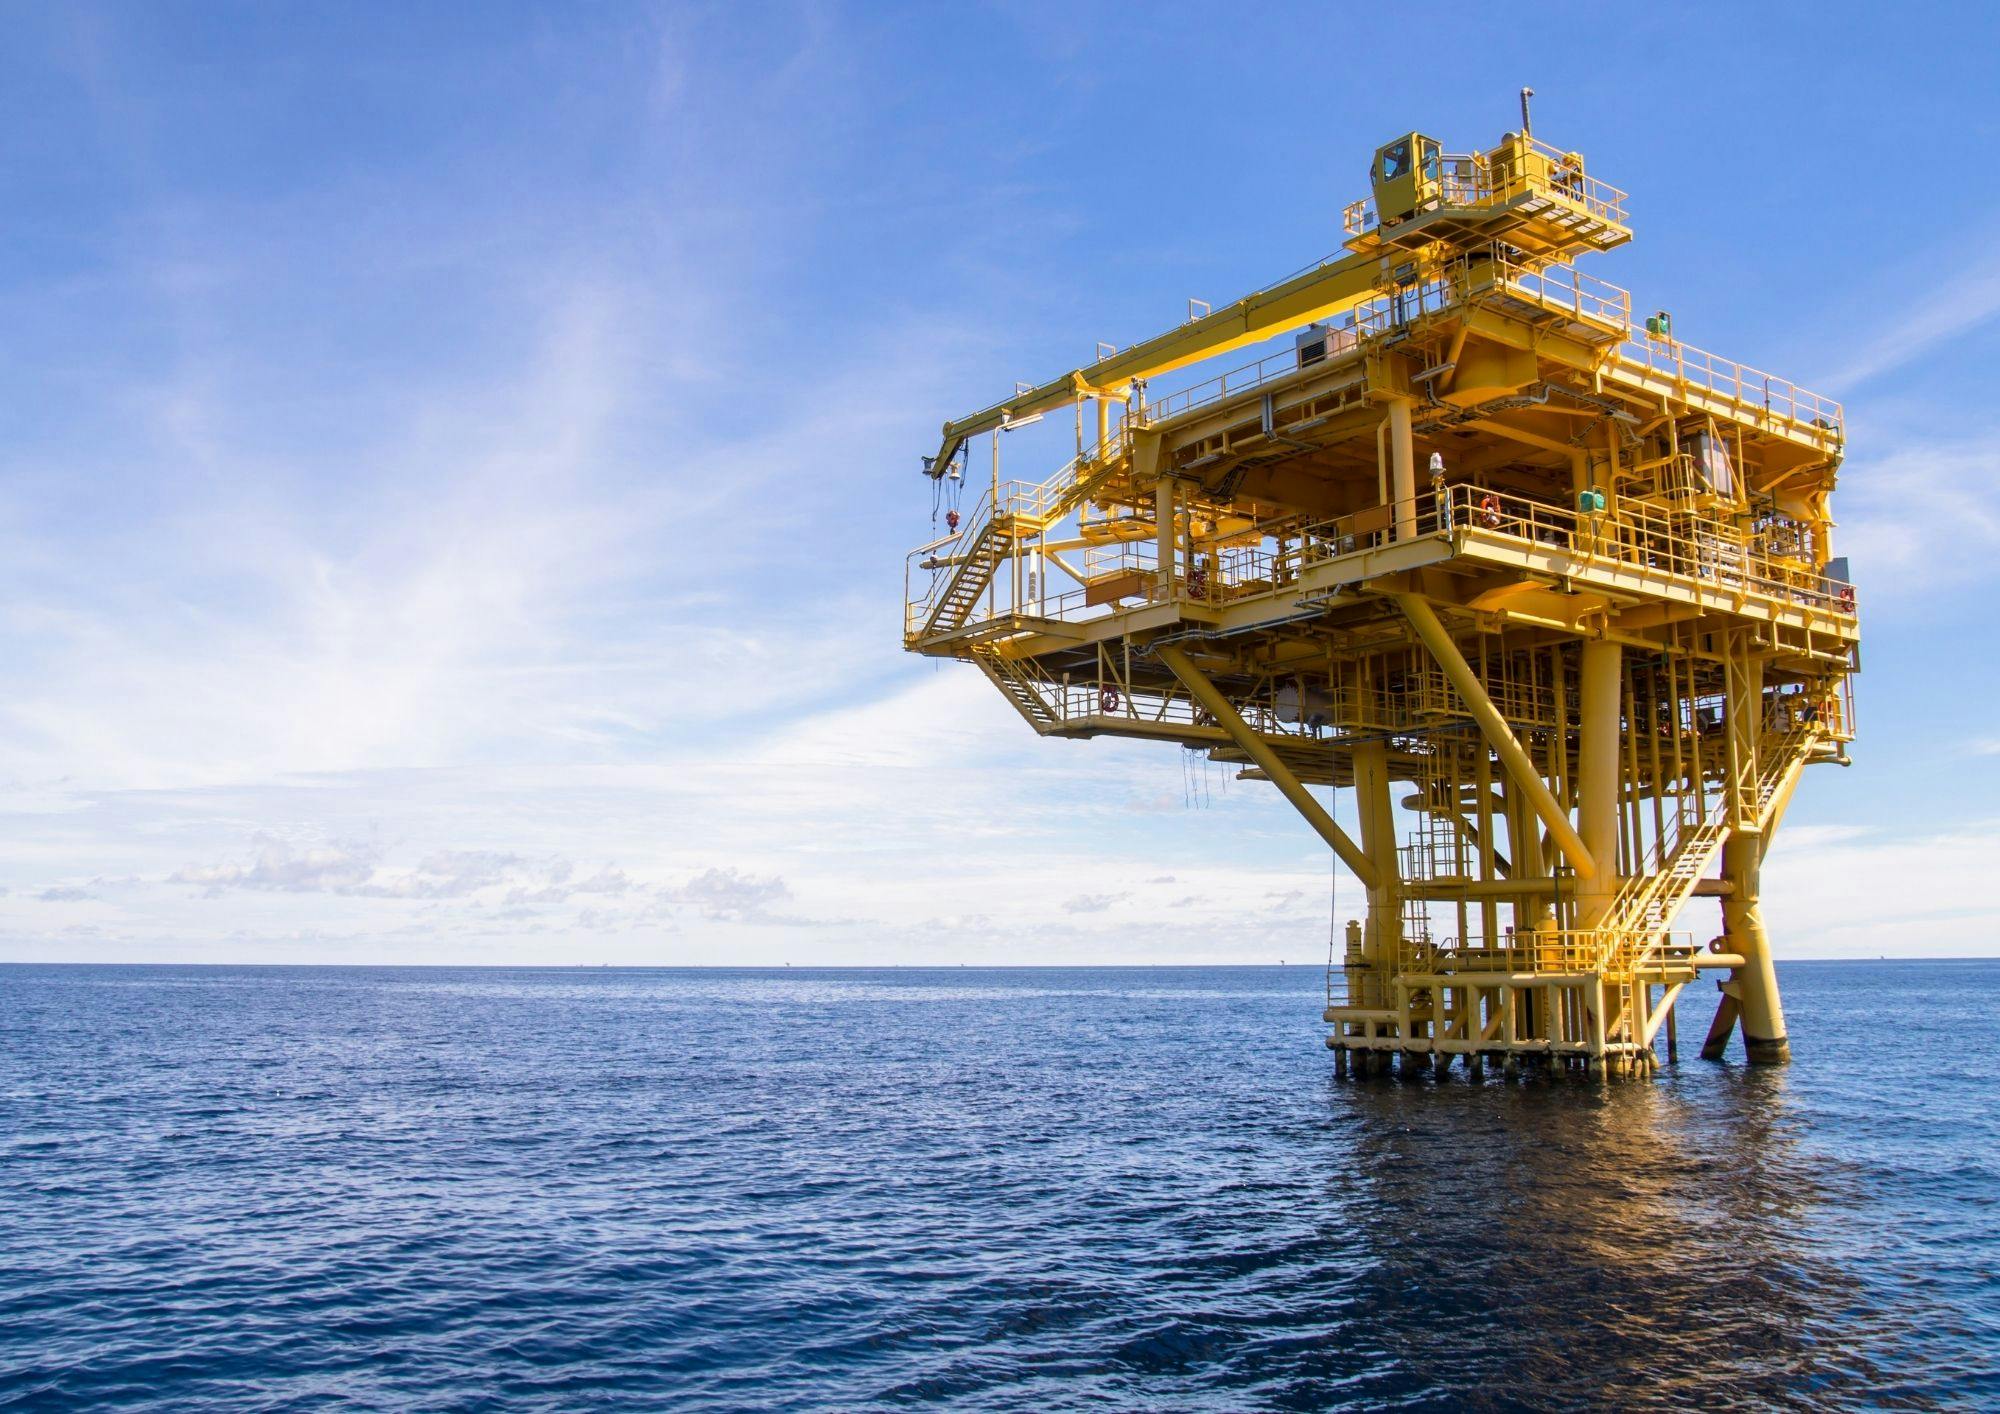 Stock image of oil rig